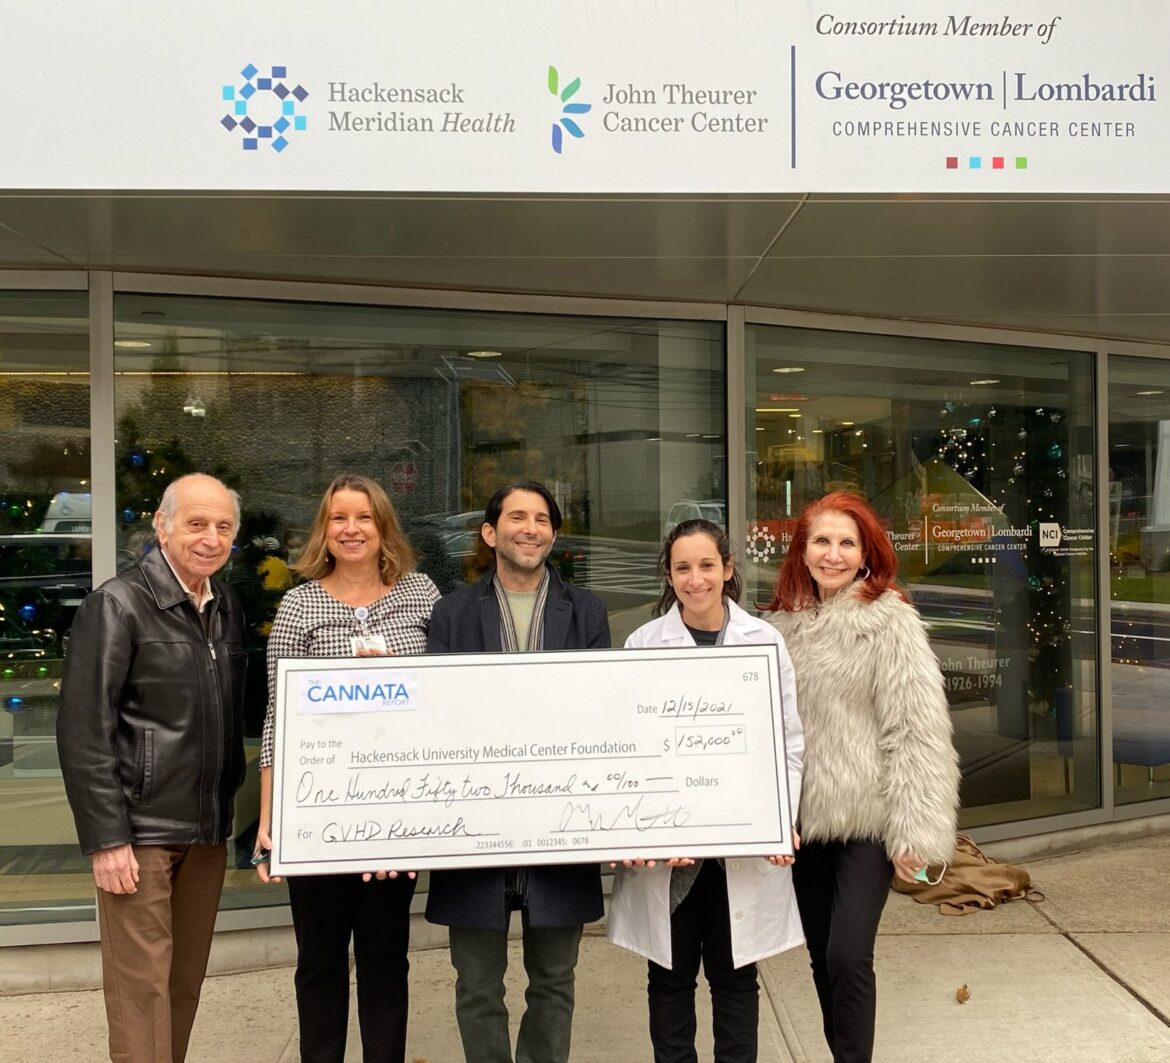 Proceeds from The Cannata Report’s Annual Awards & Charities Gala Donated to Support Innovative Research by Rachel Rosenstein, M.D., Ph.D. at John Theurer Cancer Center